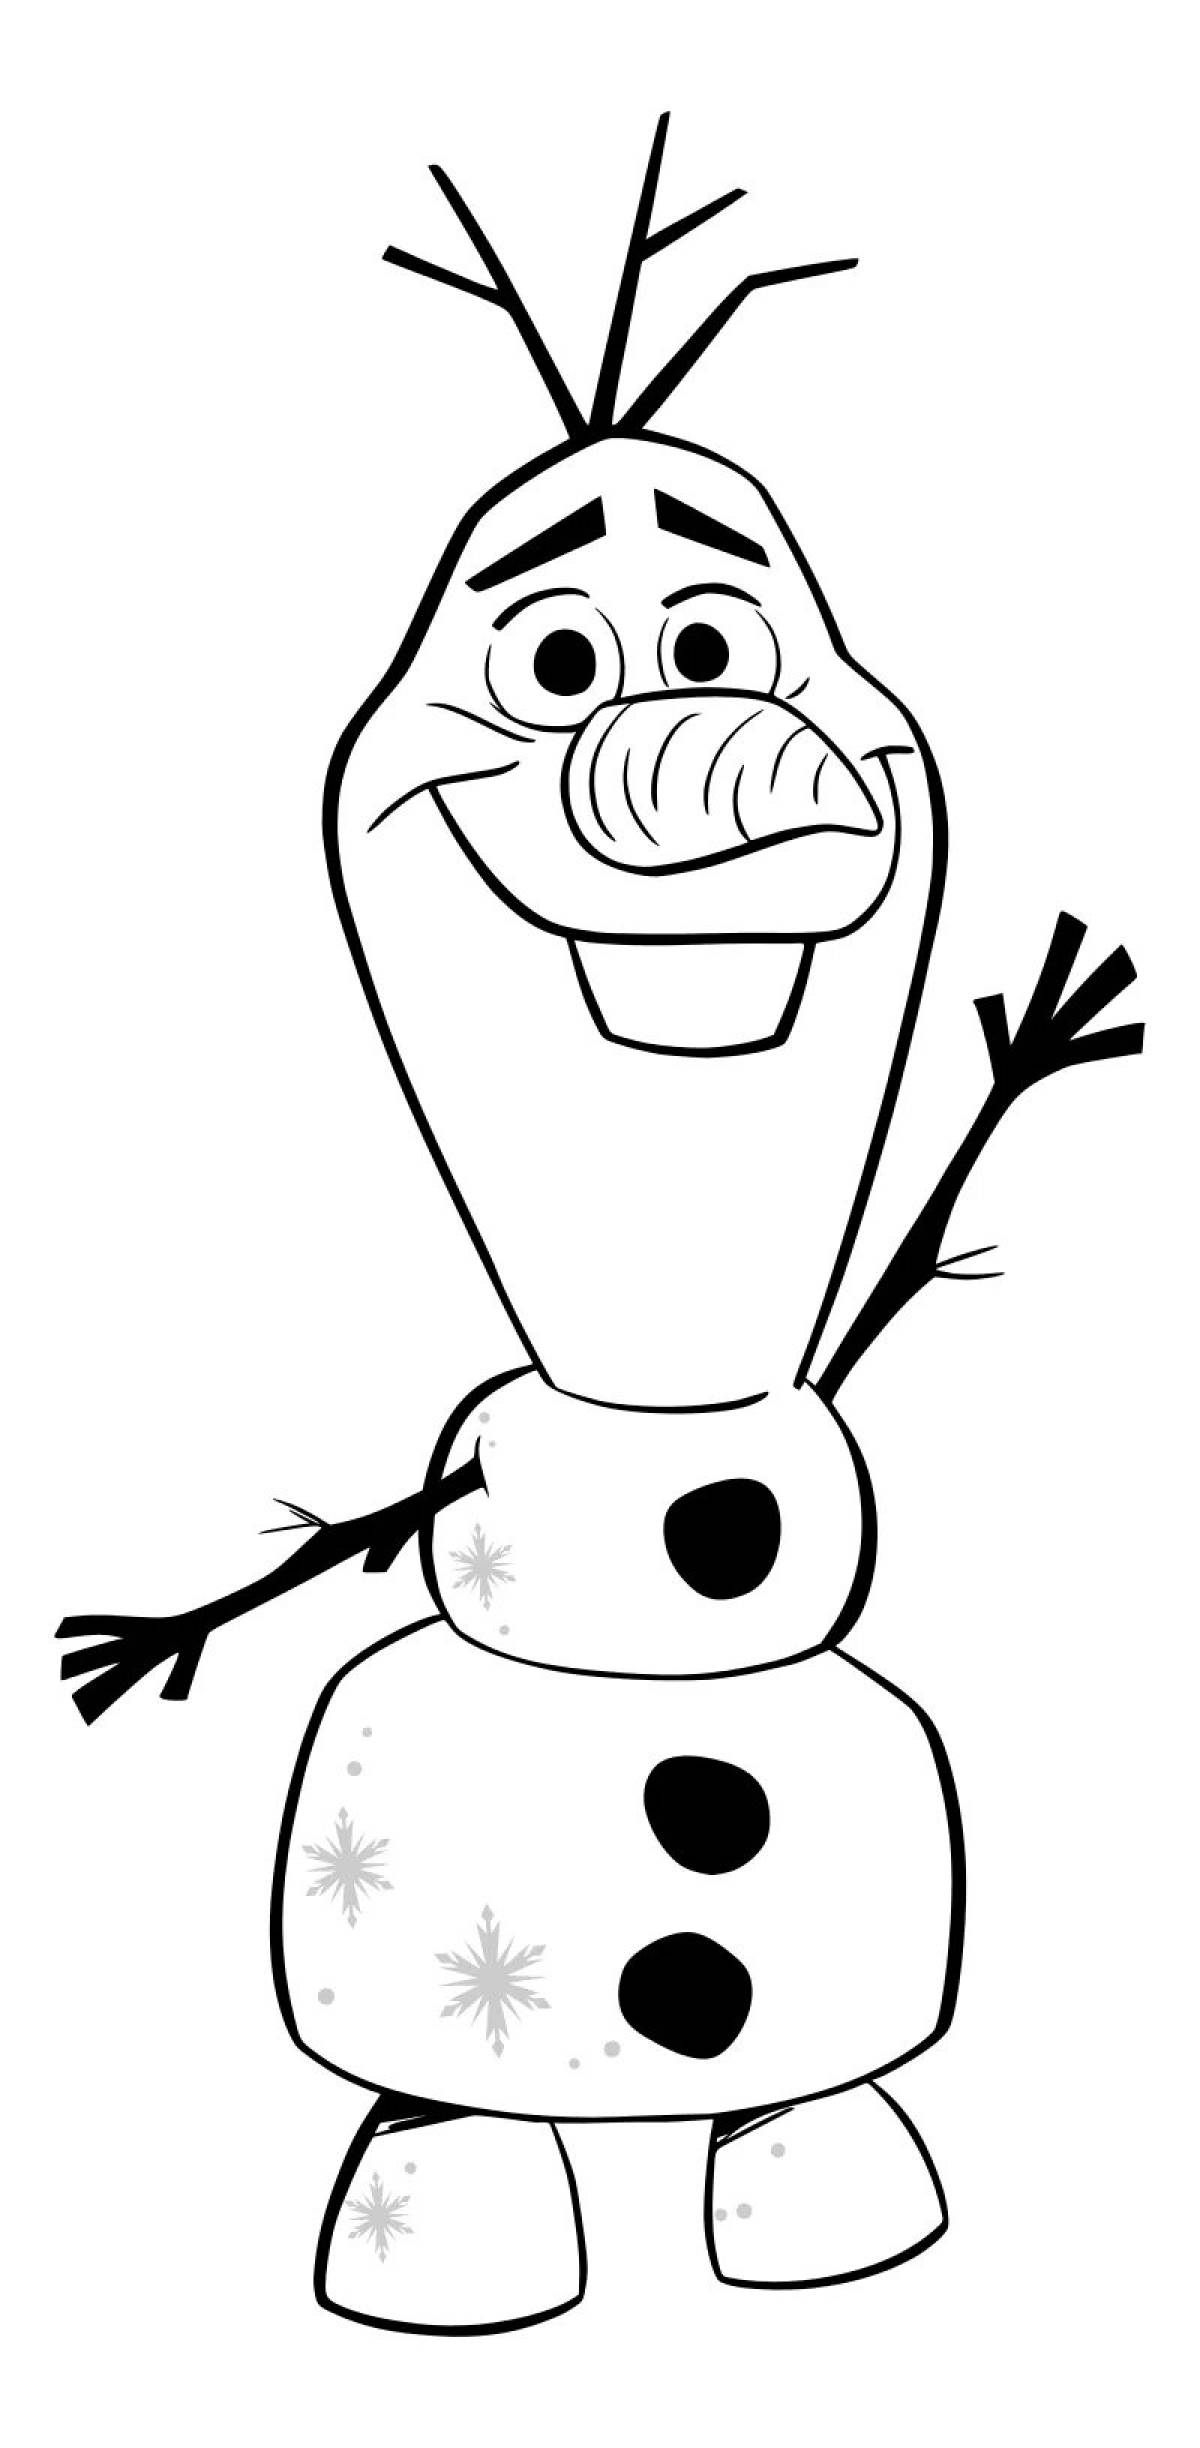 Olaf's exciting coloring book for kids